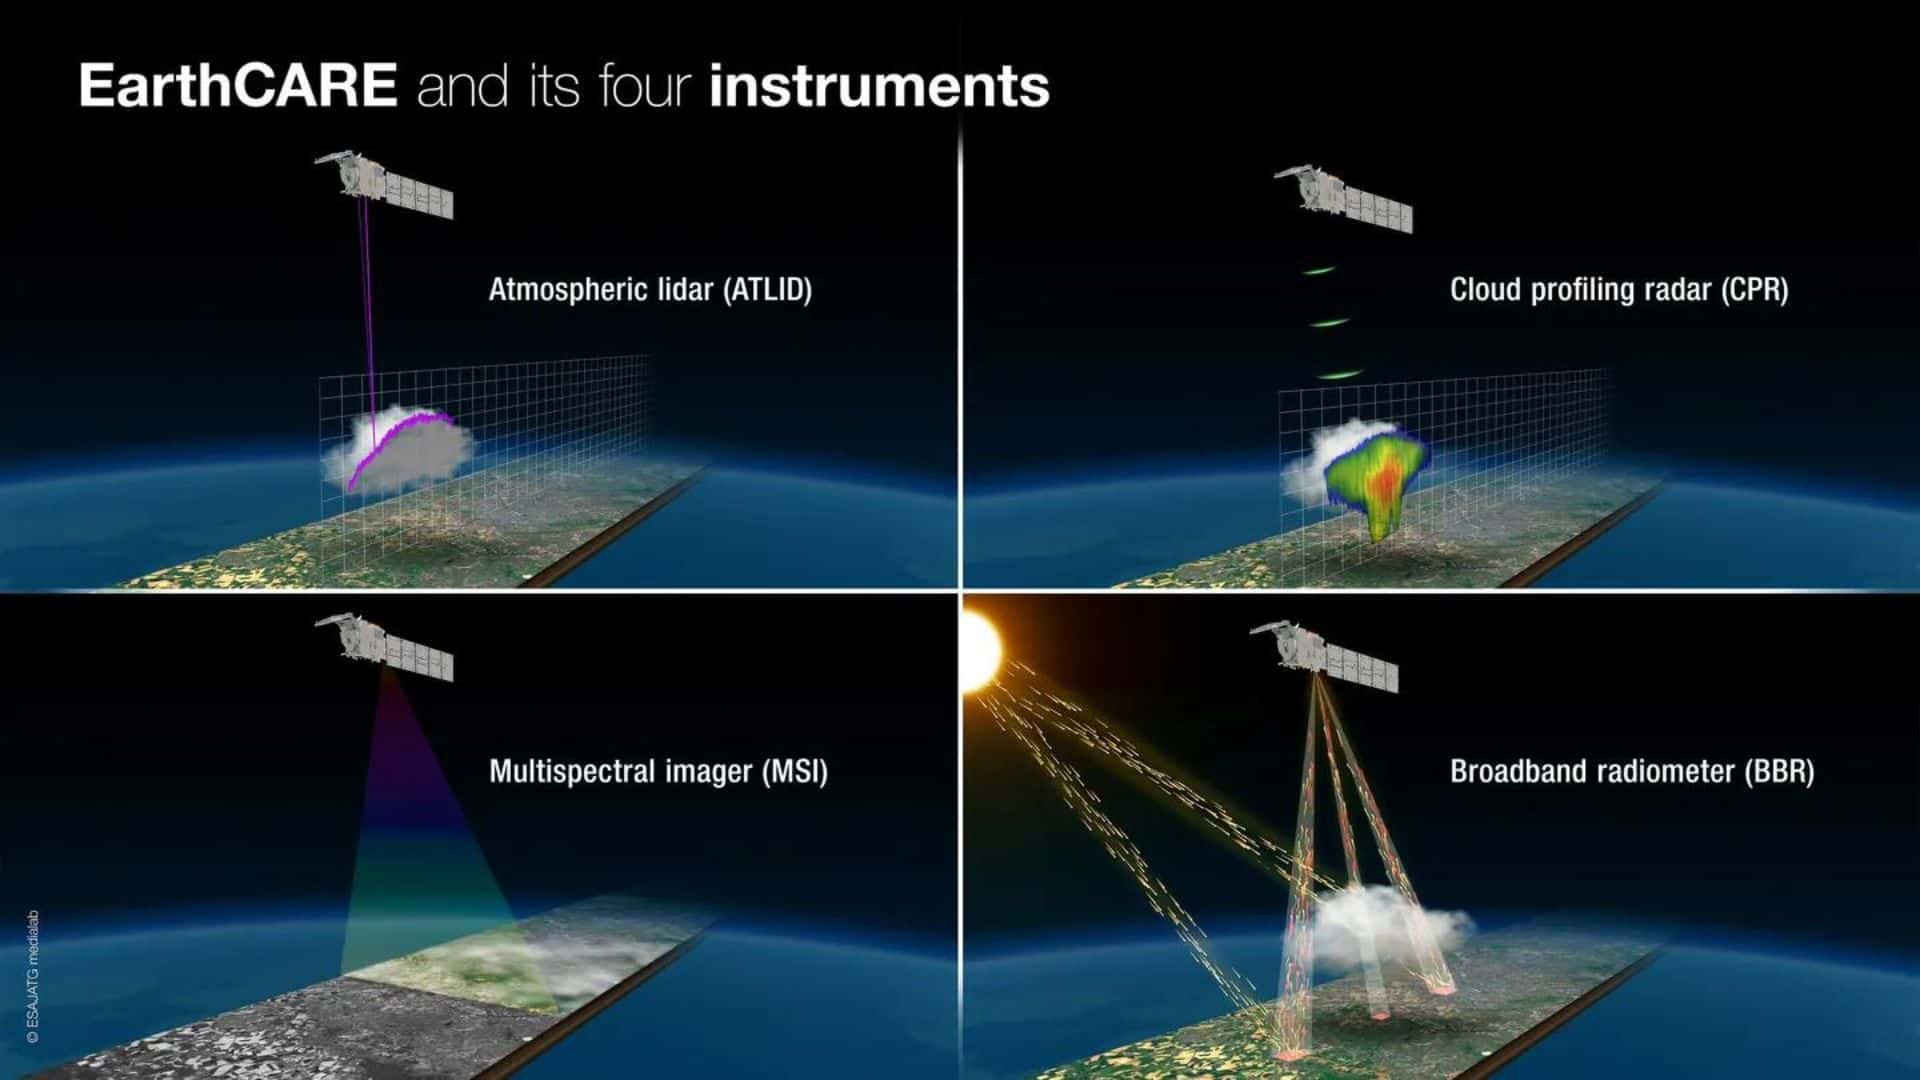 EarthCARE satellite and its four scientific instruments